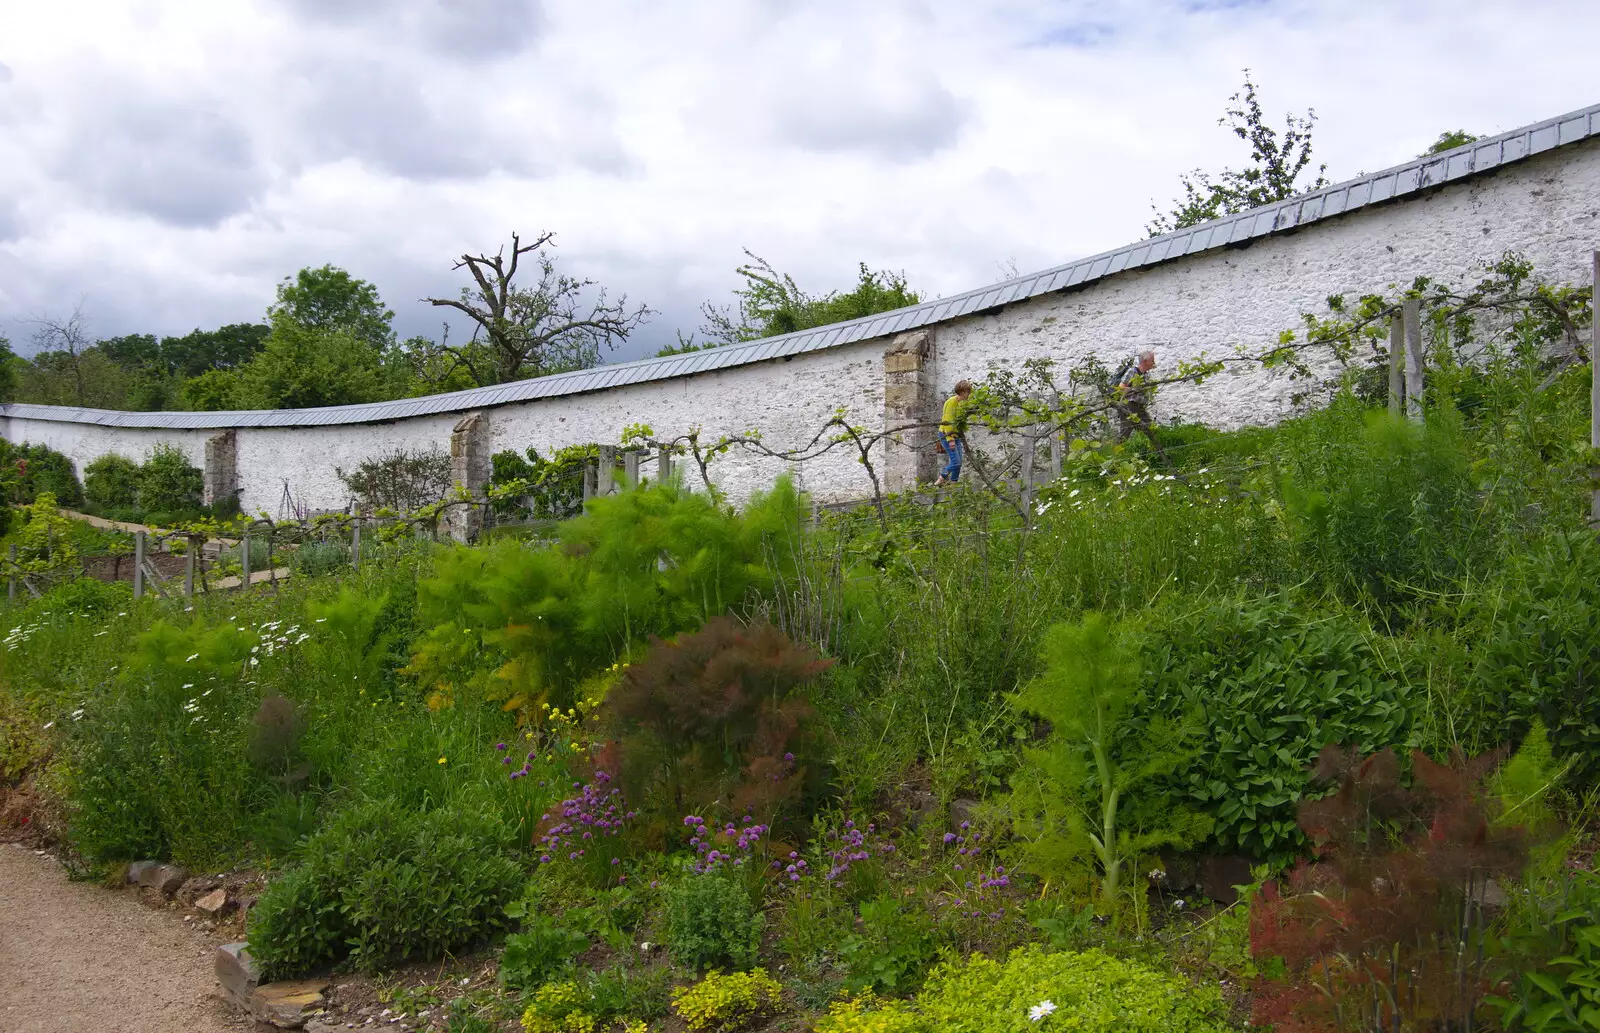 The unusually-shaped walled garden, from Chagford Lido and a Trip to Parke, Bovey Tracey, Devon - 25th May 2019